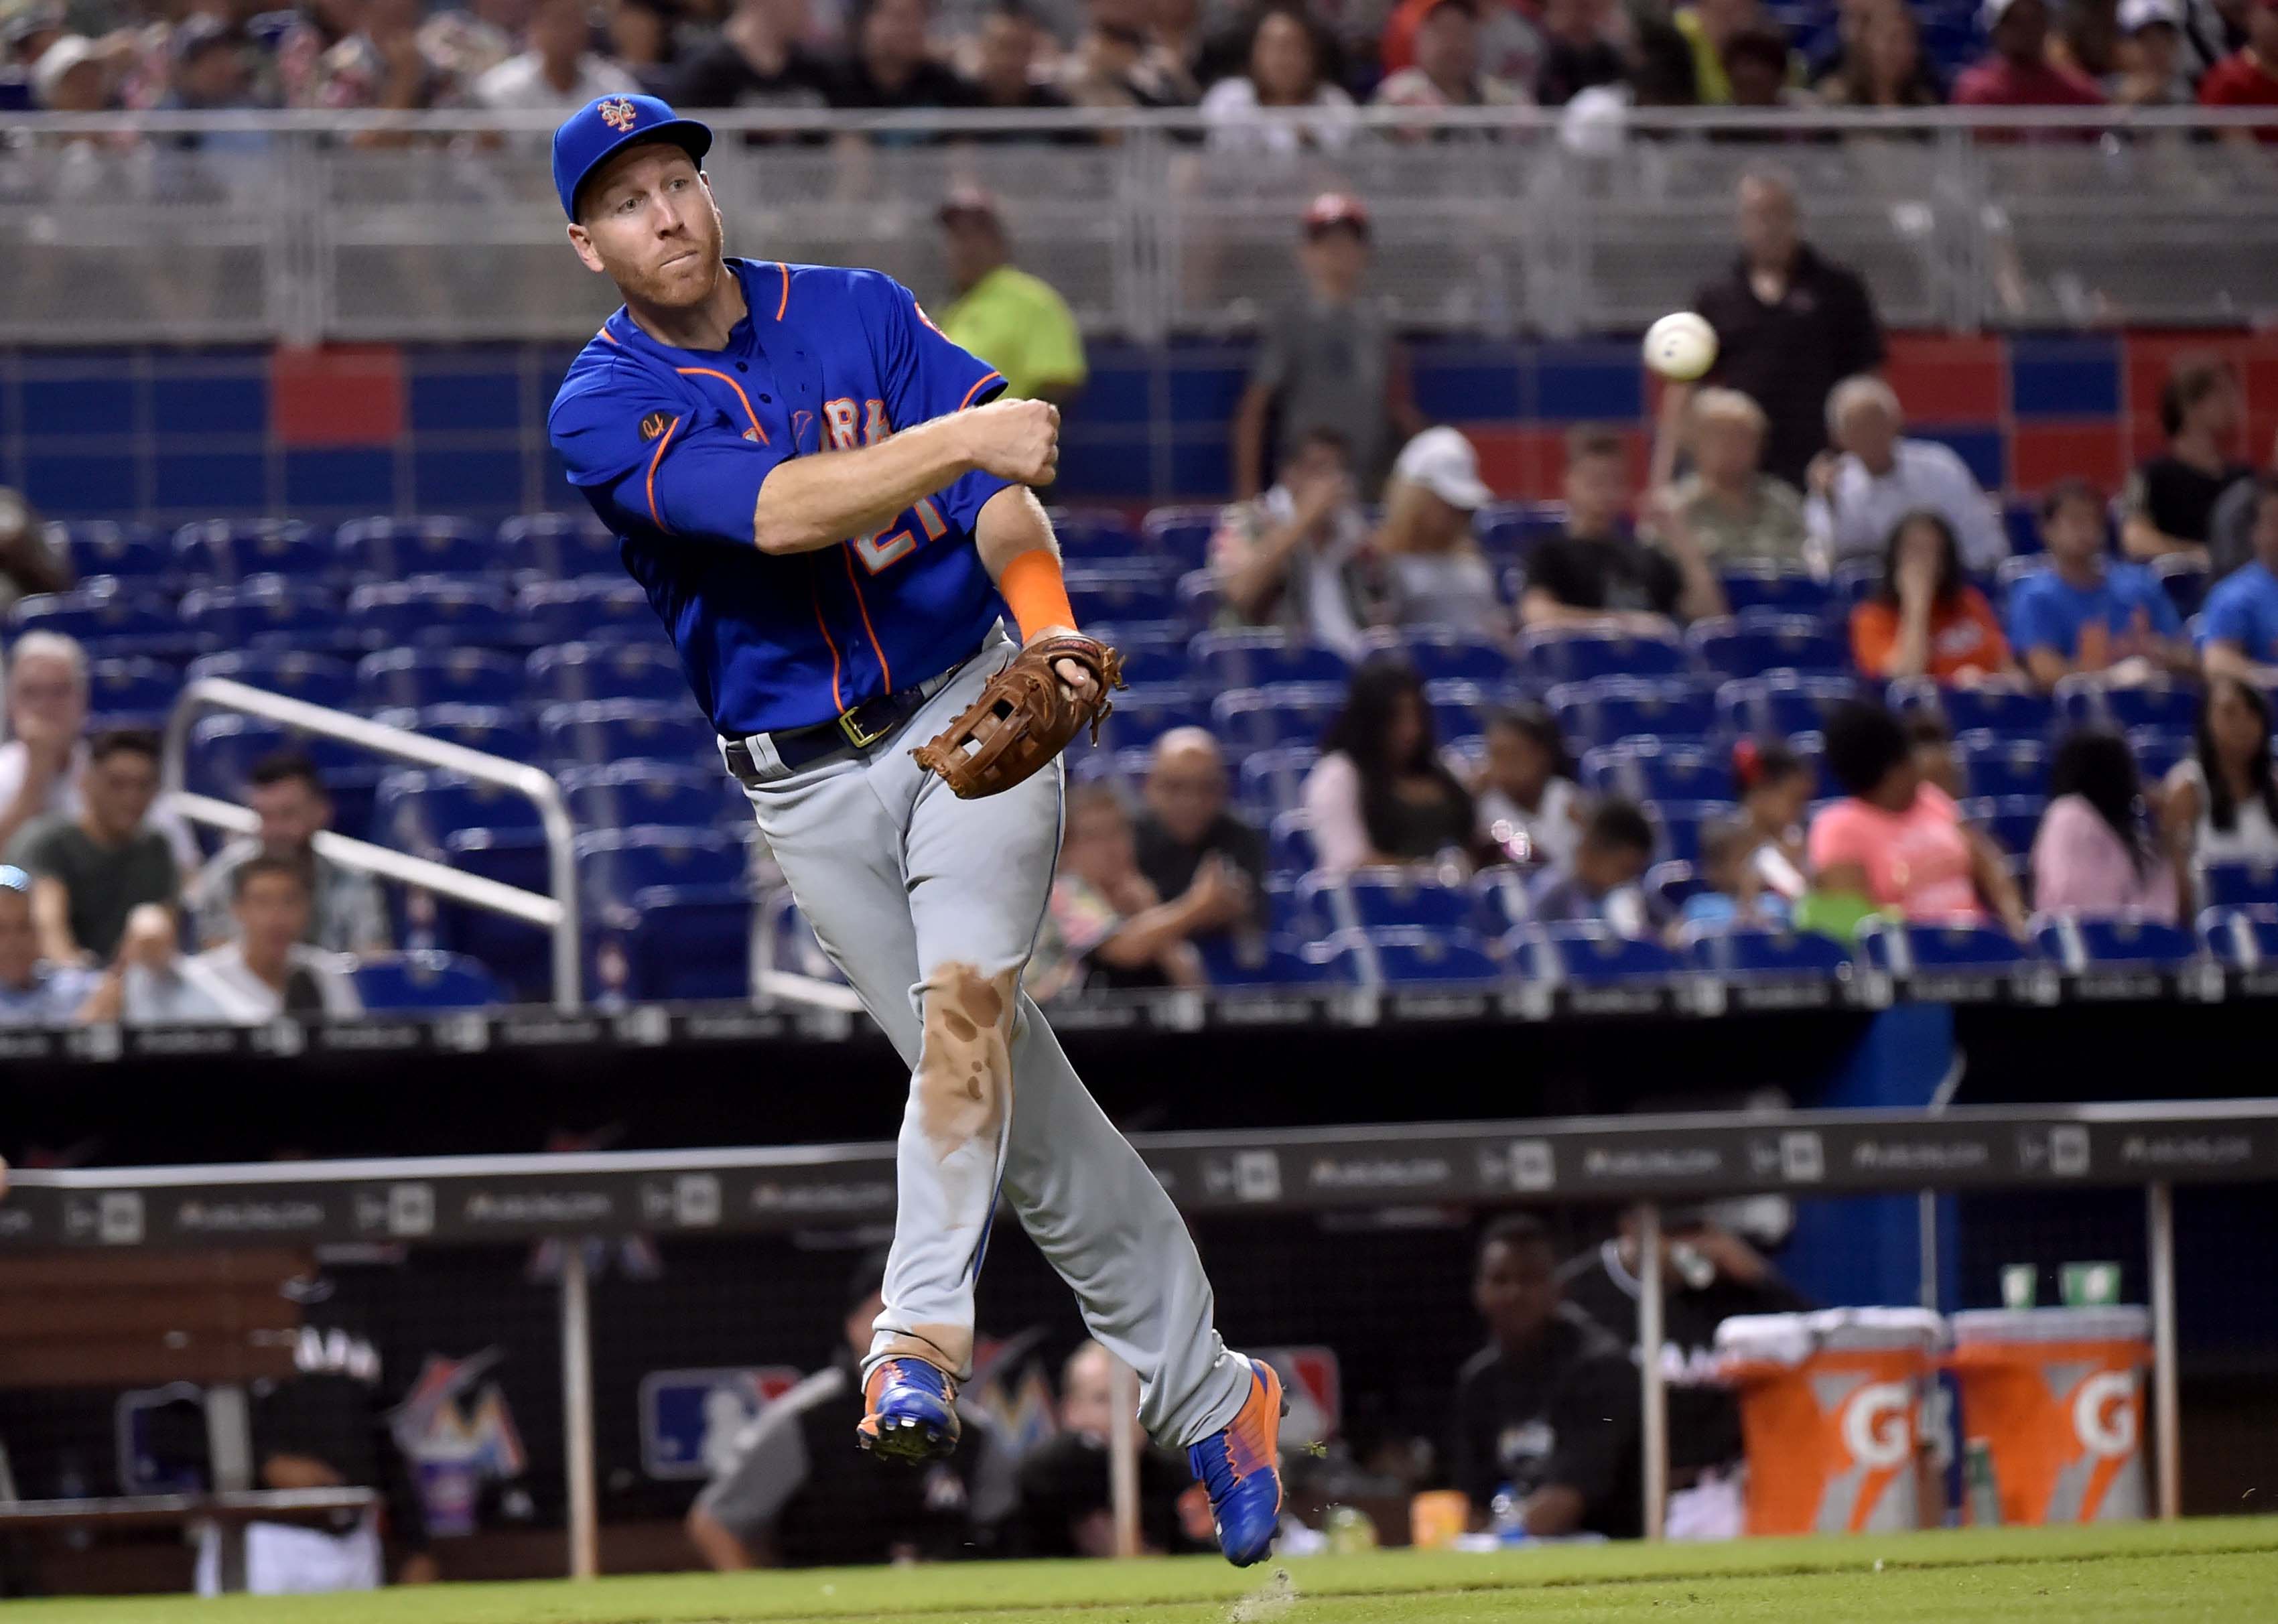 8/12/18 Game Preview: New York Mets at Miami Marlins